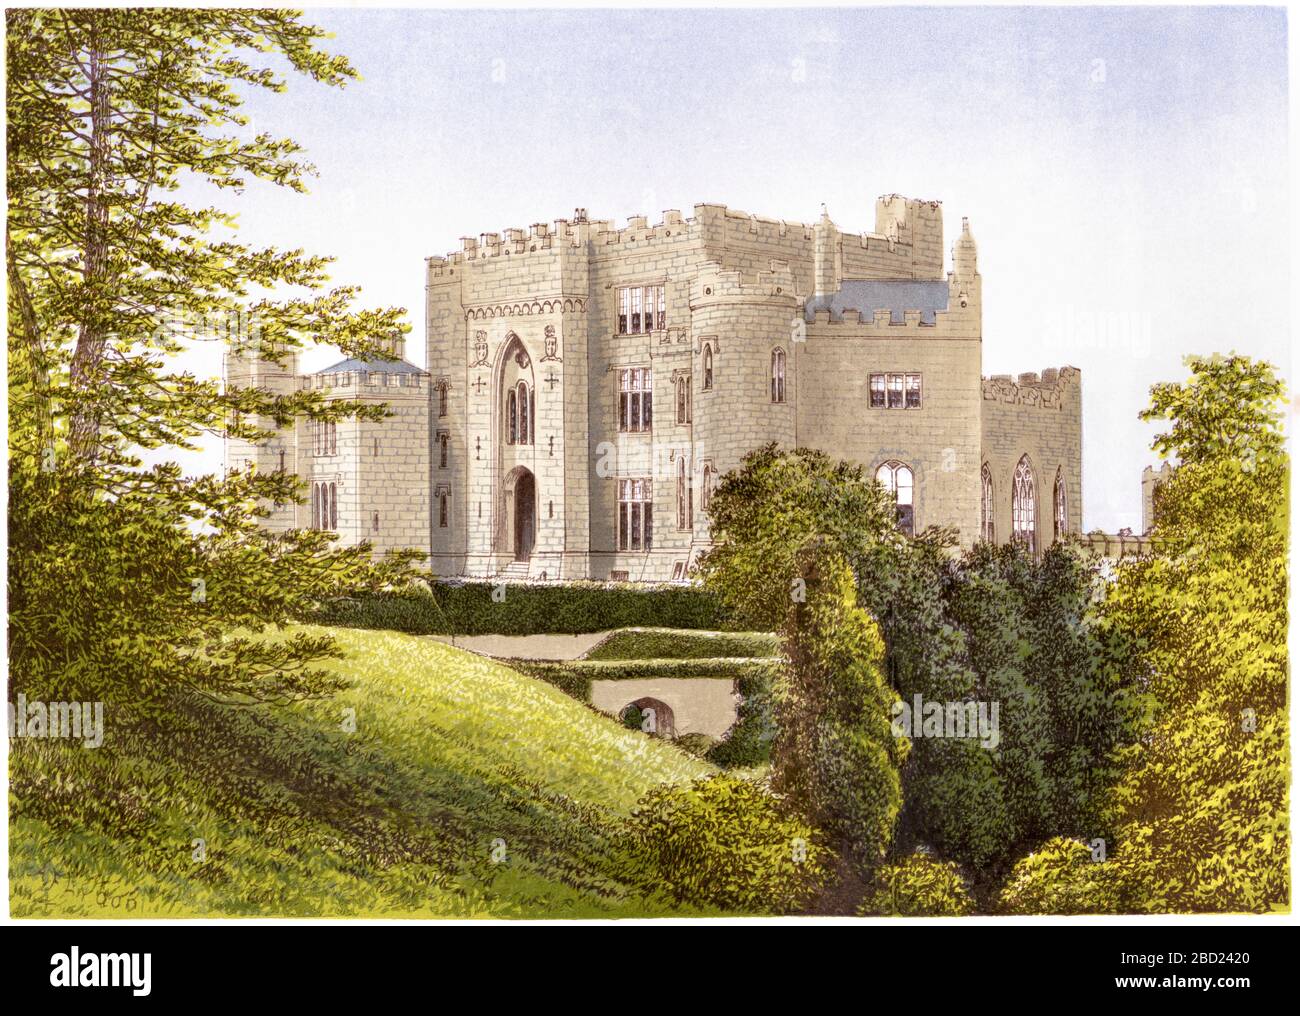 A coloured illustration of Birr Castle, Parsonstown, Ireland scanned at high resolution from a book printed in 1870. Believed copyright free. Stock Photo